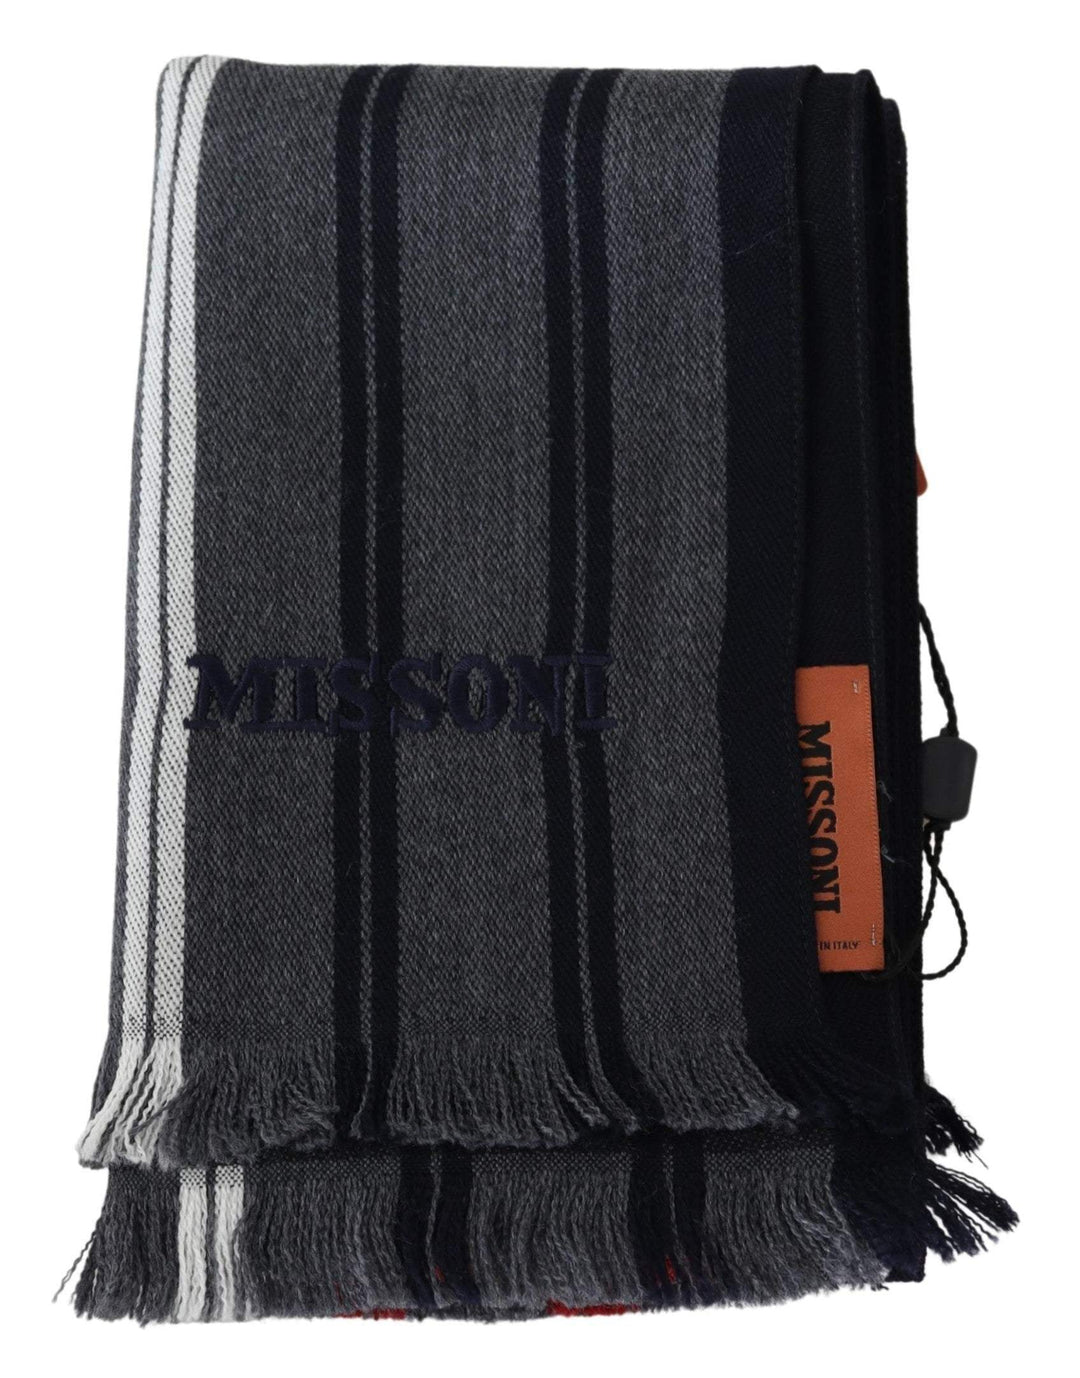 Missoni Multicolor Wool Striped Unisex Neck Wrap Shawl Scarf #men, Accessories - New Arrivals, feed-agegroup-adult, feed-color-Multicolor, feed-gender-male, Missoni, Multicolor, Scarves - Men - Accessories at SEYMAYKA